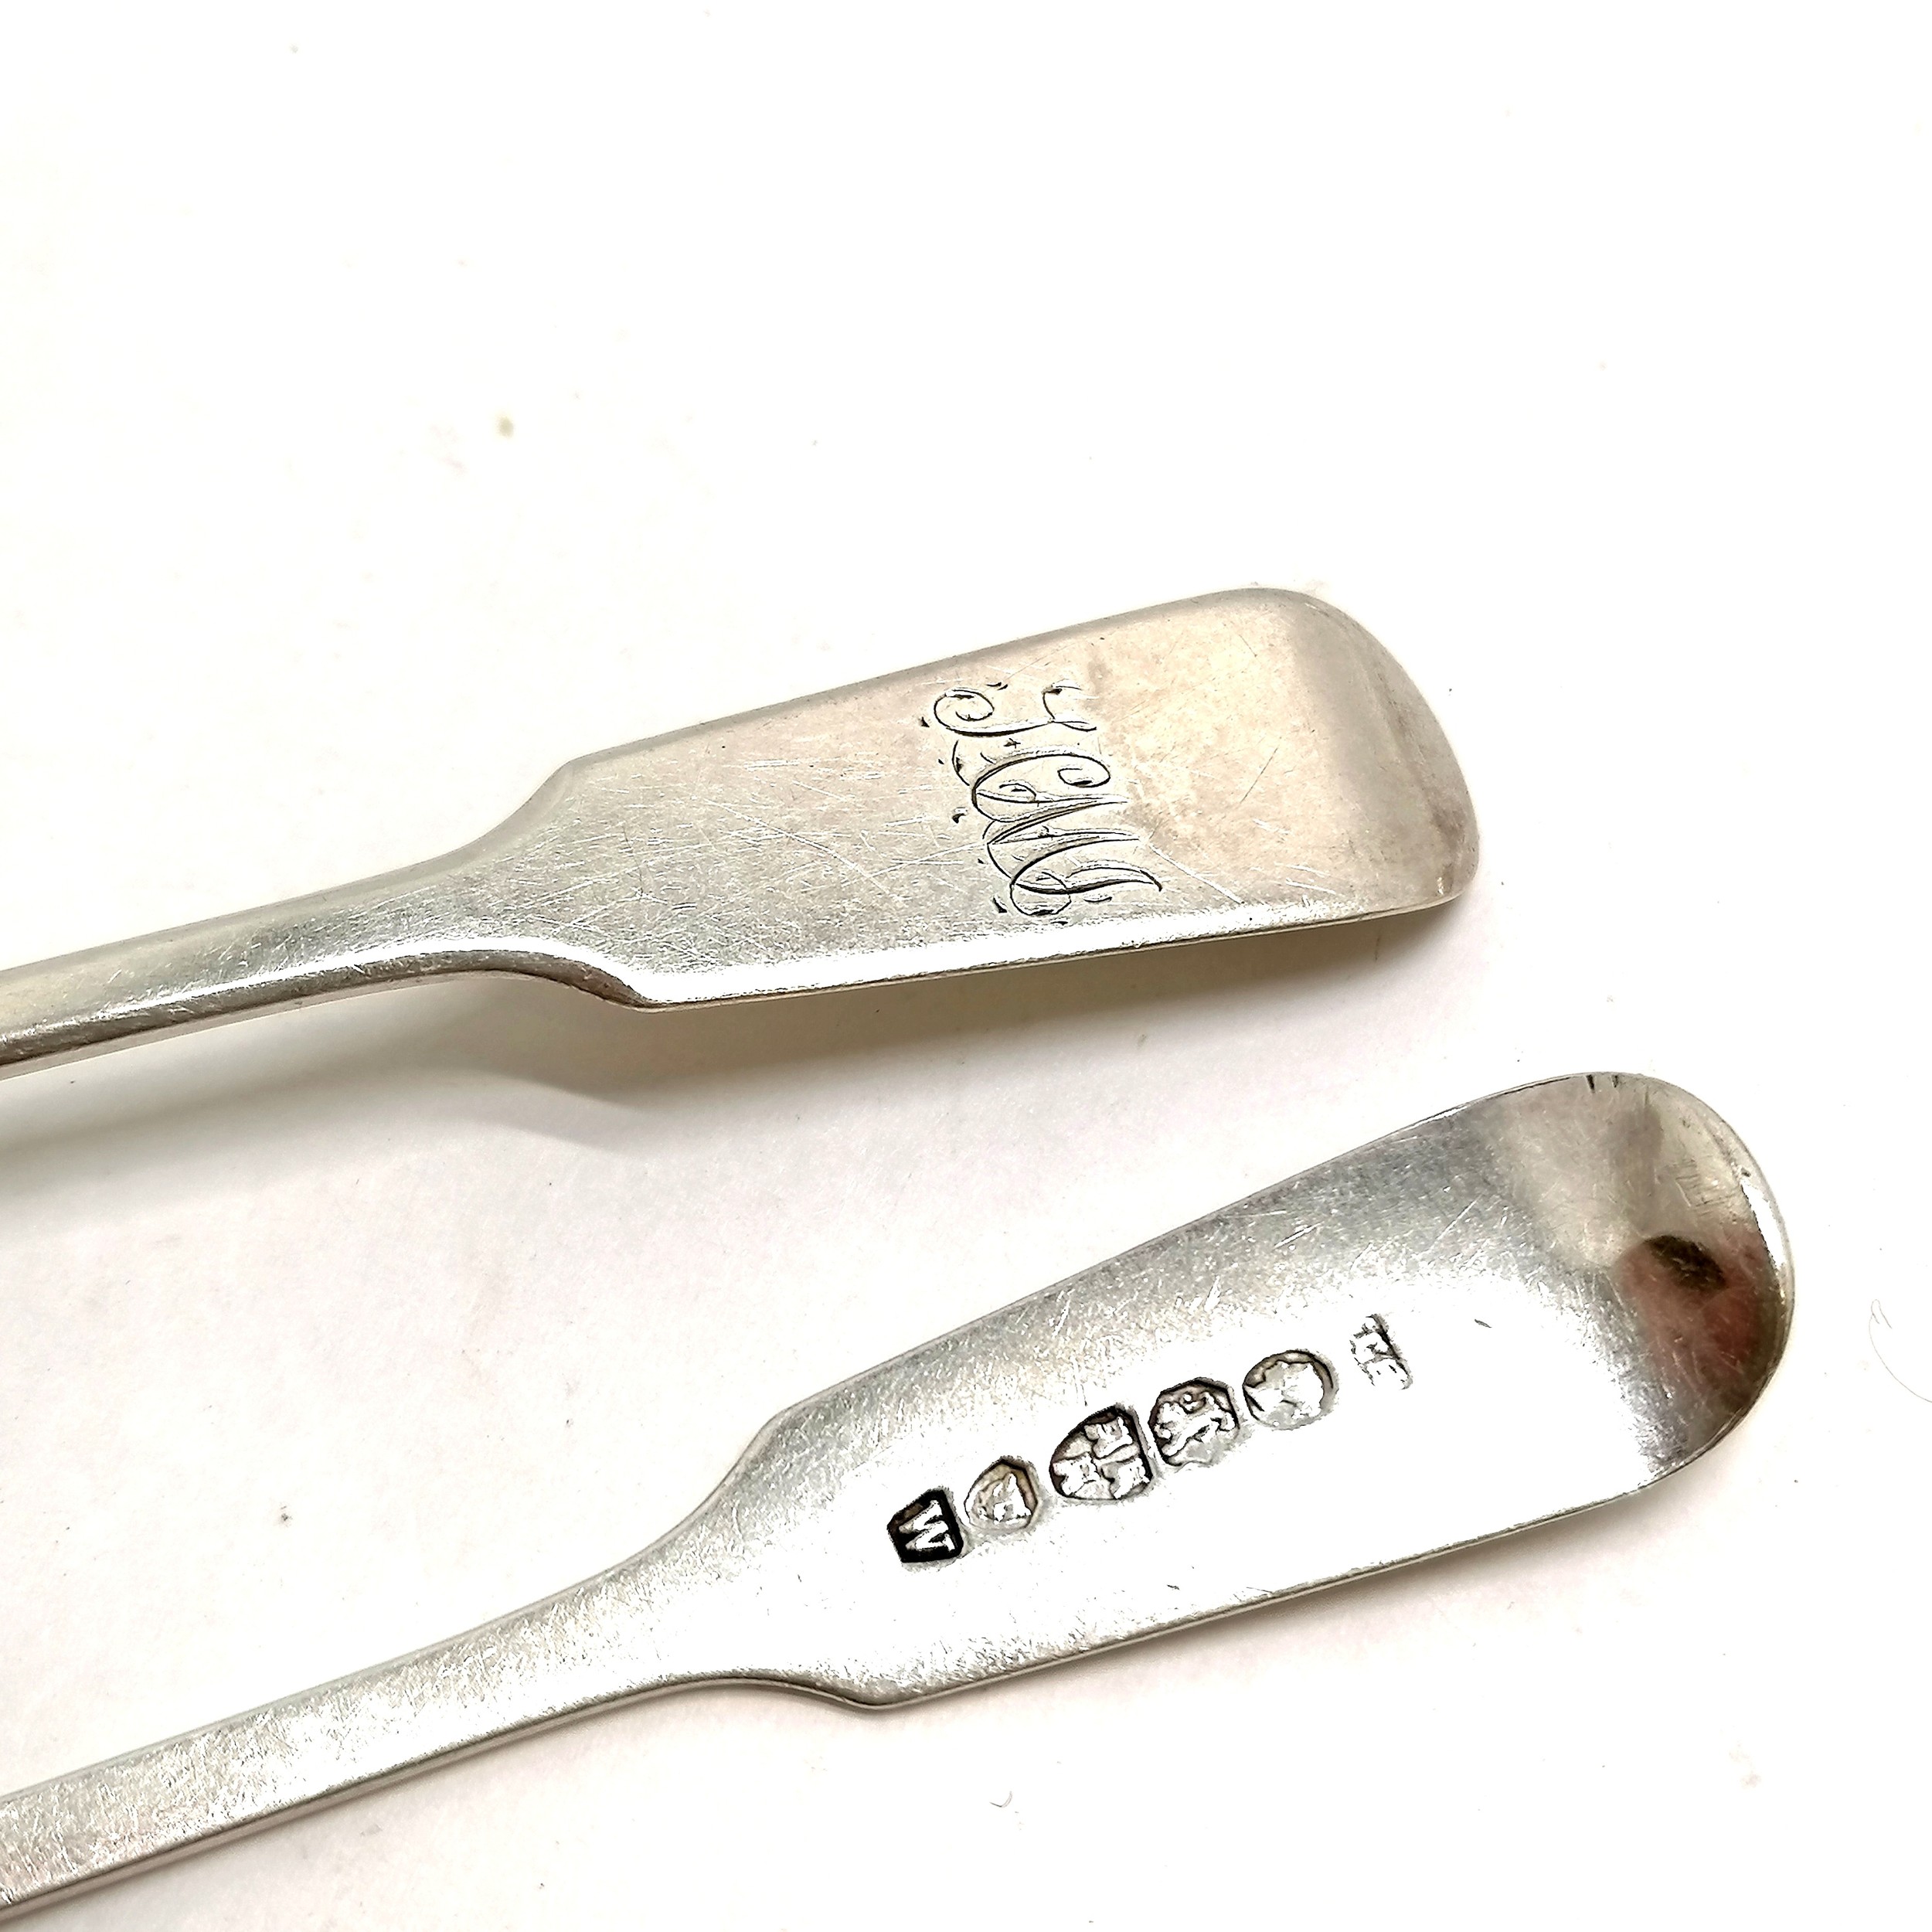 5 x Newcastle silver 1860 fiddle pattern teaspoons by Thomas Sewell - 13.5cm & 80g - Image 2 of 3